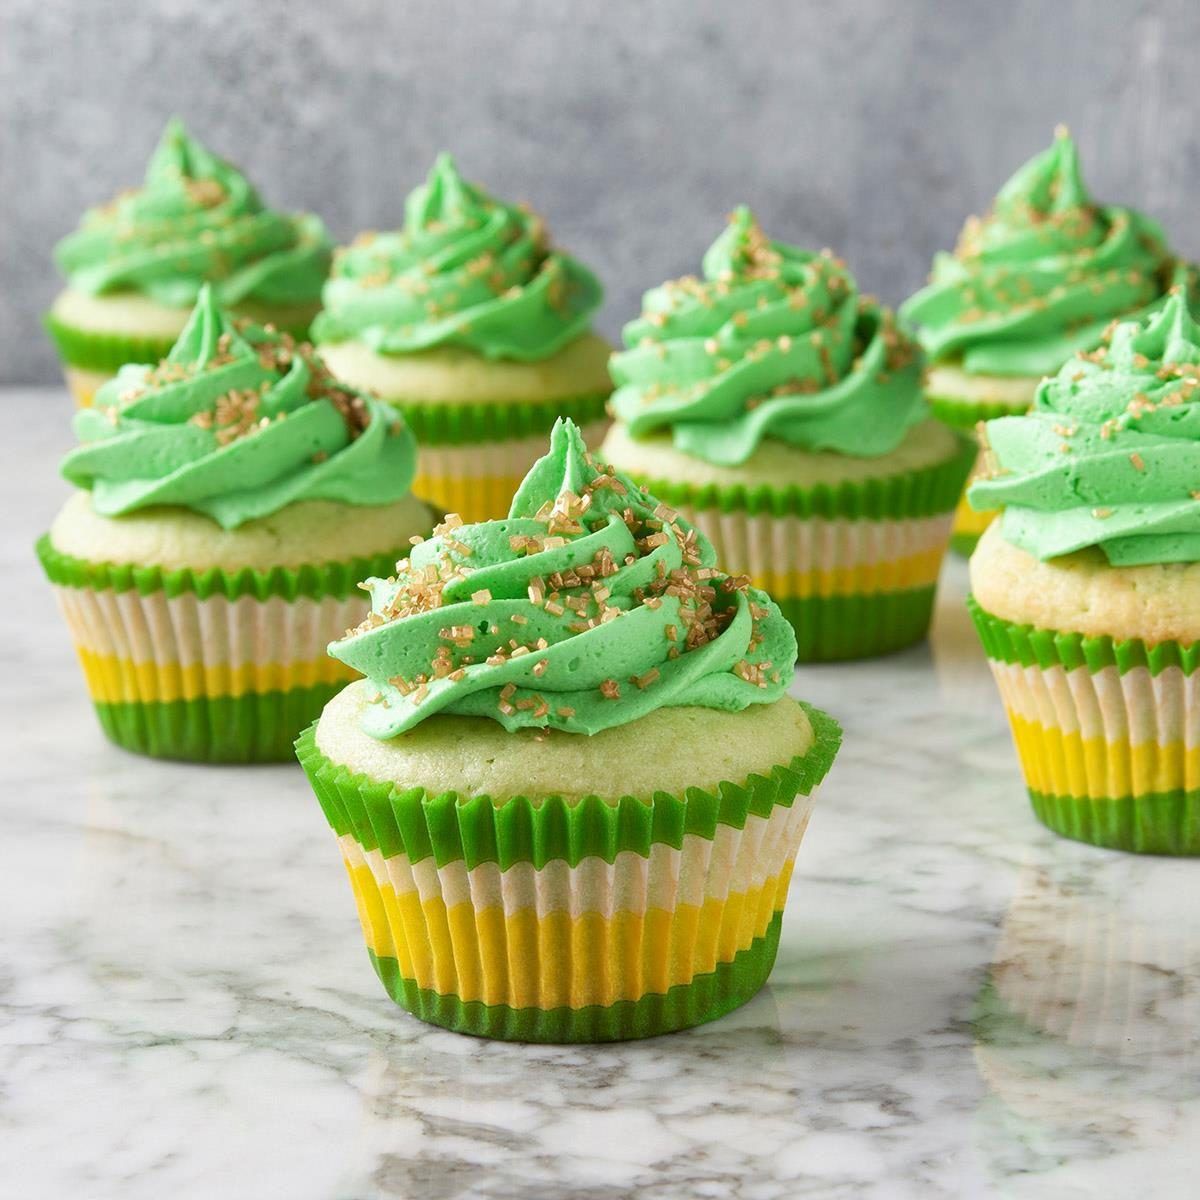 <p>These St. Patrick's Day cupcakes go super-quick. The pistachio pudding mix gives them a mild flavor and their pretty pastel color makes them a perfect dessert for this lively holiday. —Kathy Meyer, Almond, Wisconsin</p> <div class="listicle-page__buttons"> <div class="listicle-page__cta-button"><a href='https://www.tasteofhome.com/recipes/st-patrick-s-day-cupcakes/'>Go to Recipe</a></div> </div>